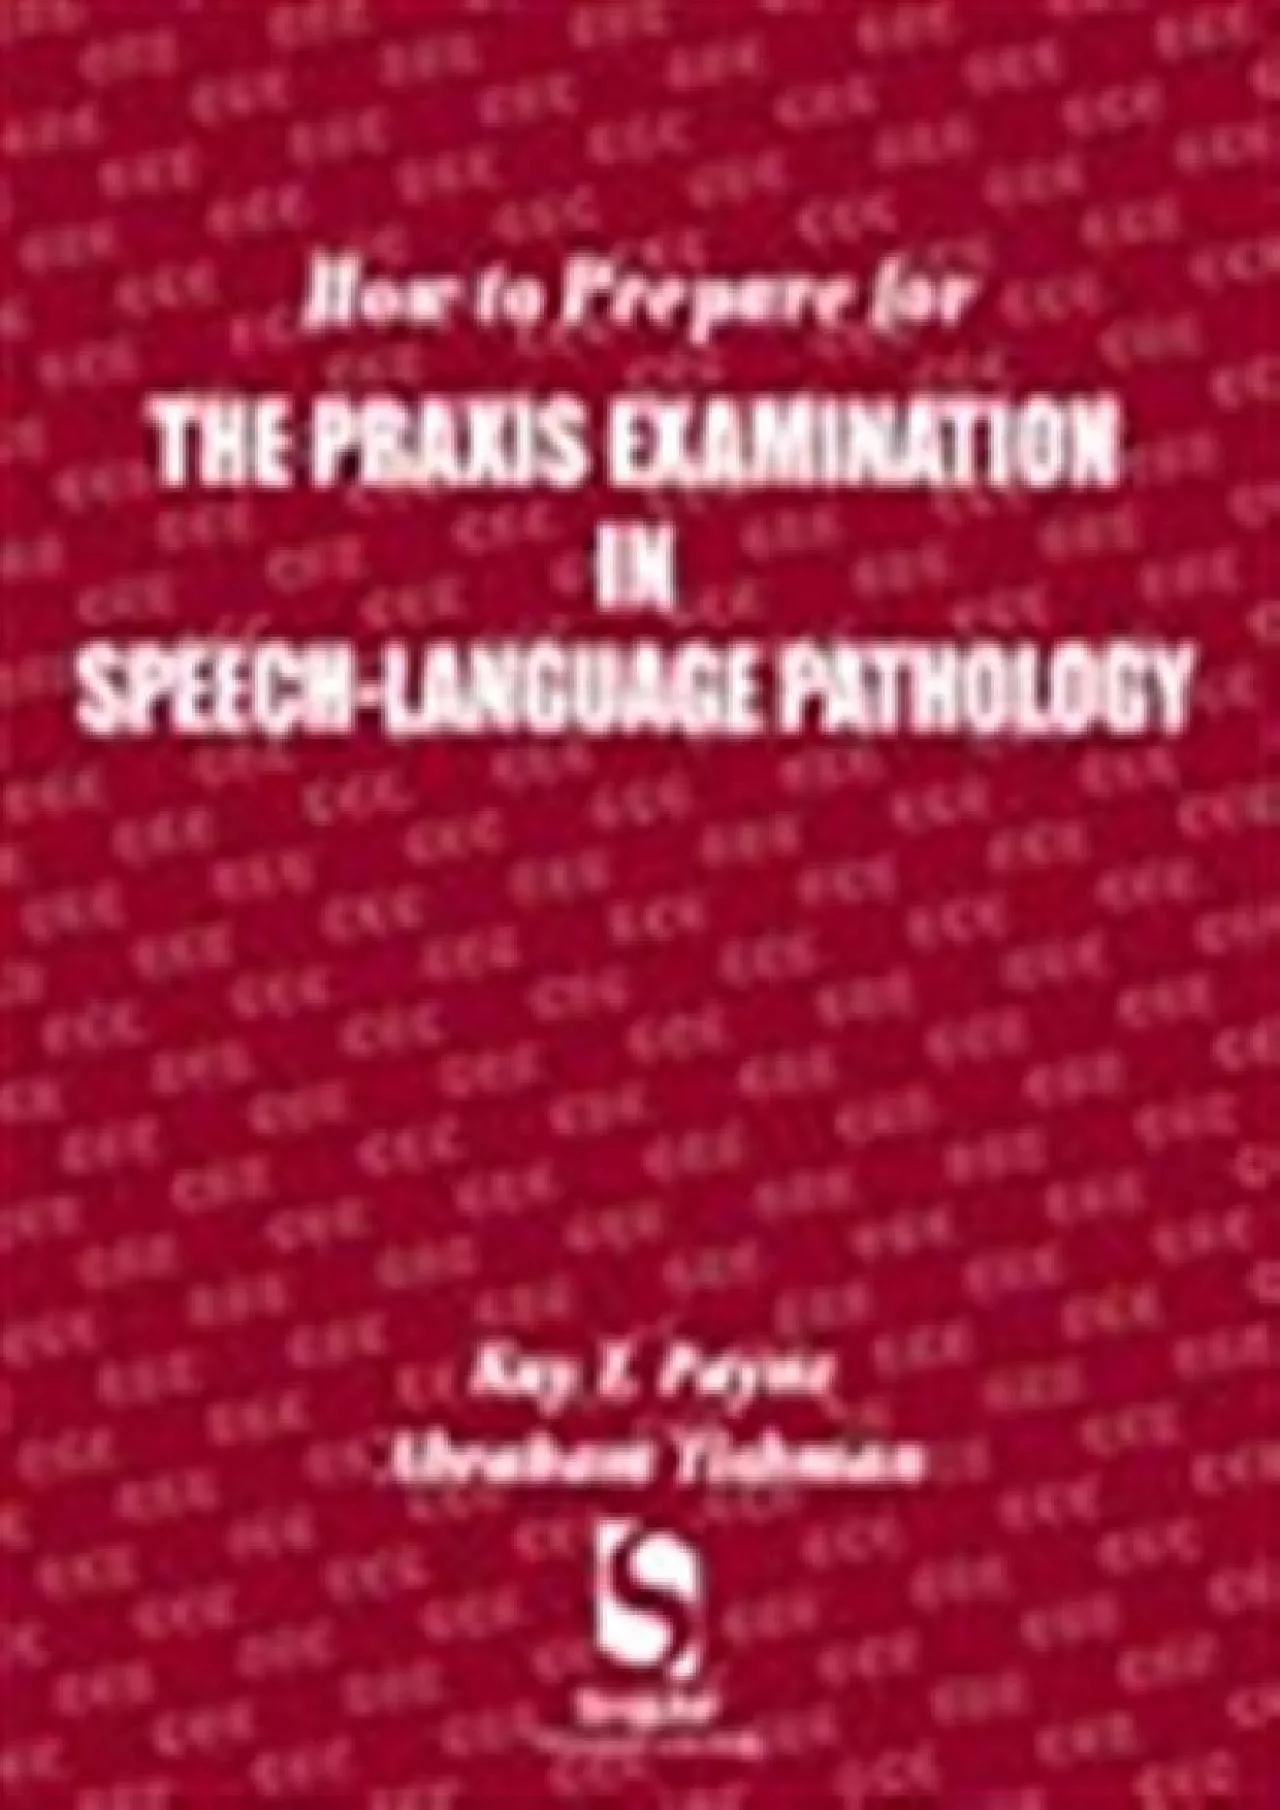 (READ)-How to Prepare for the Praxis Examination in Speech-Language Pathology